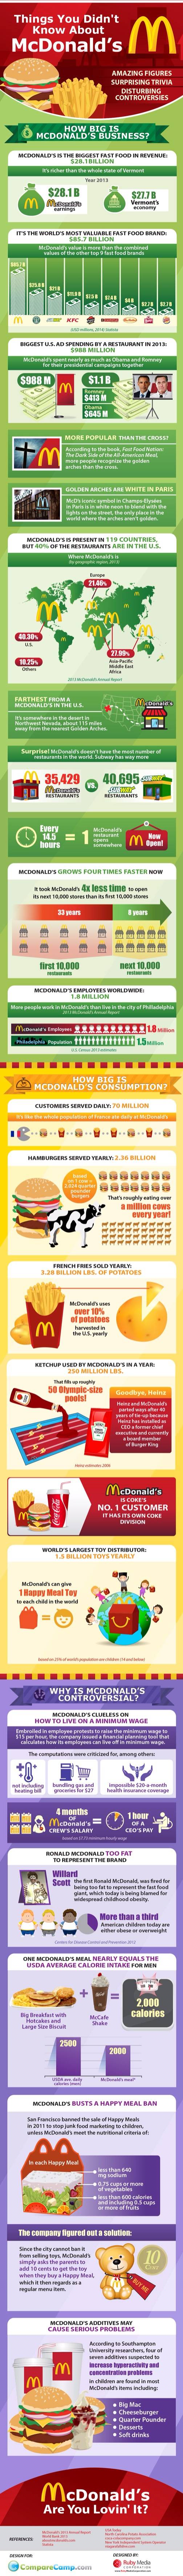 Things You Never Knew About McDonald’s